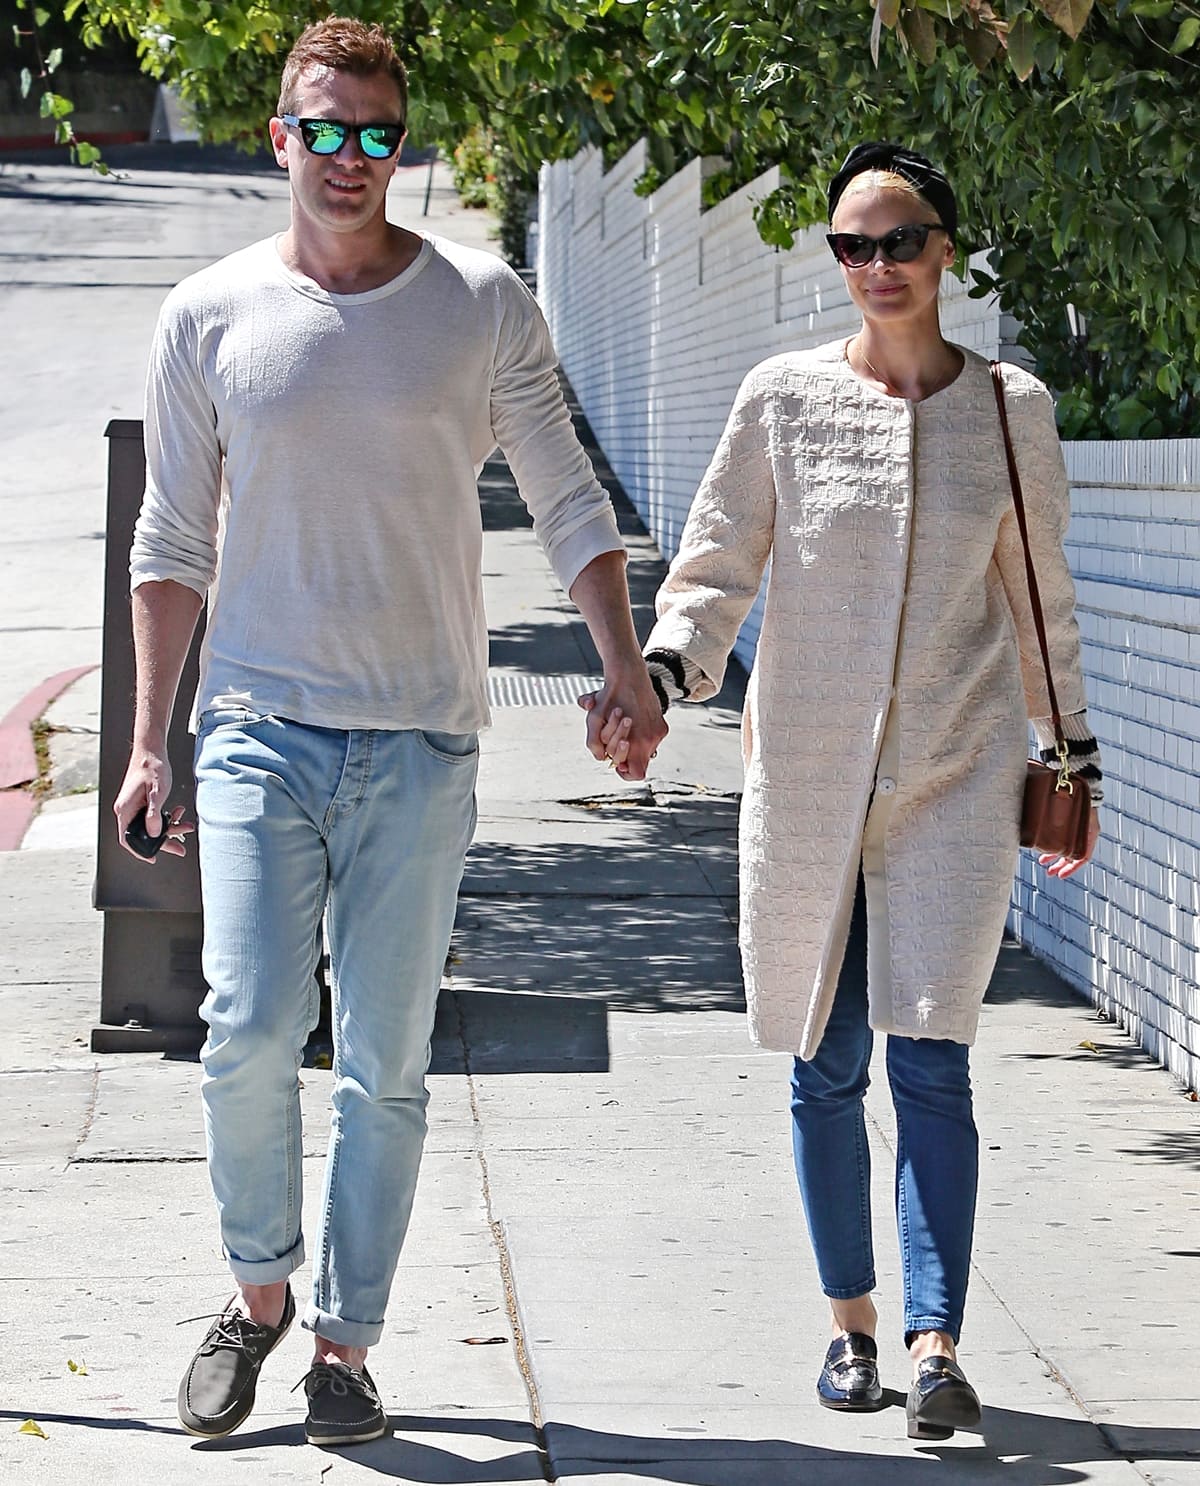 Jaime King and husband Kyle Newman seen walking while holding hands in West Hollywood